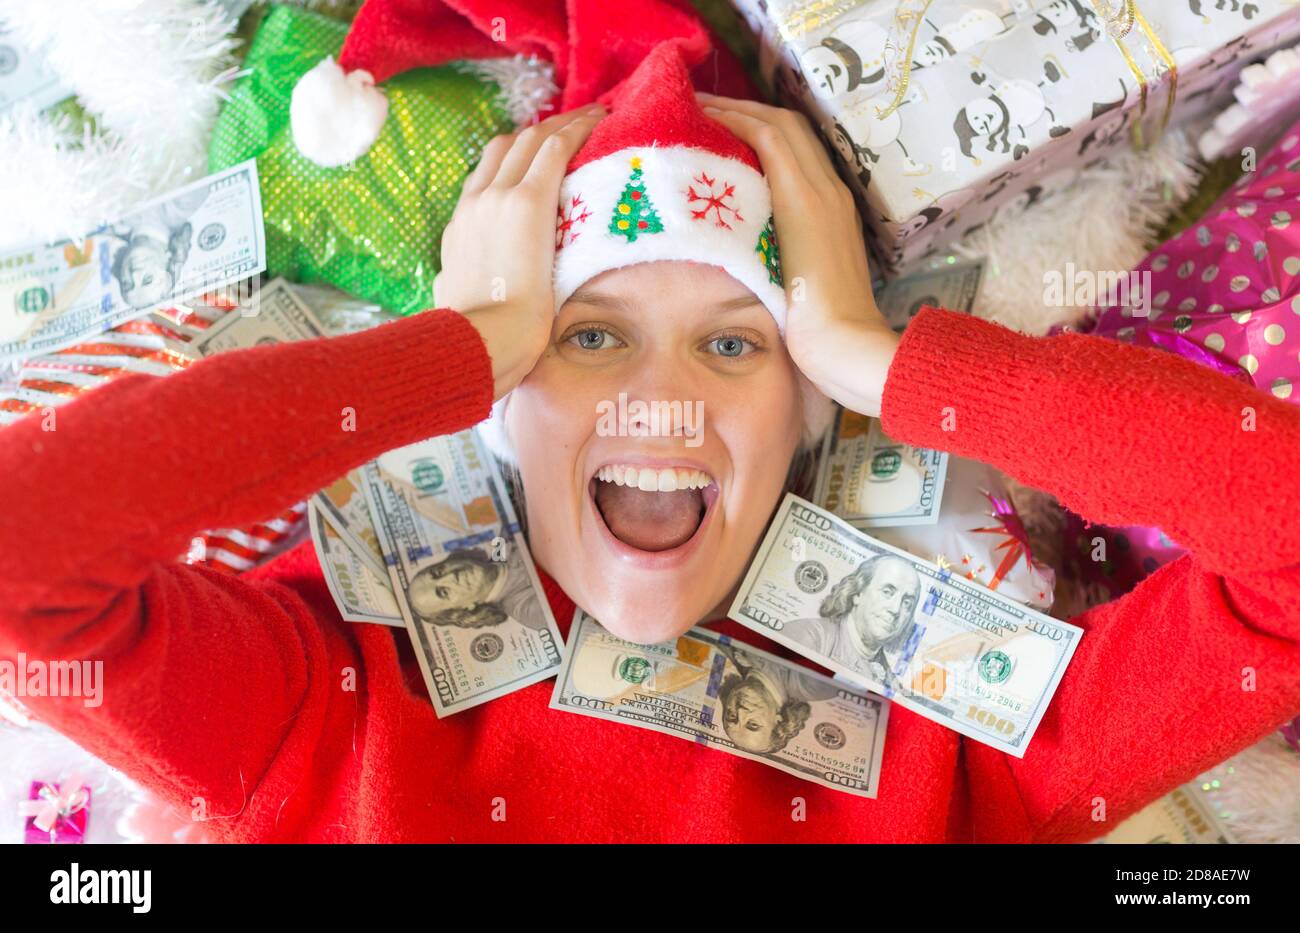 Amazed excited young woman surrounded by cash money bills and lots of Christmas gifts. Stock Photo